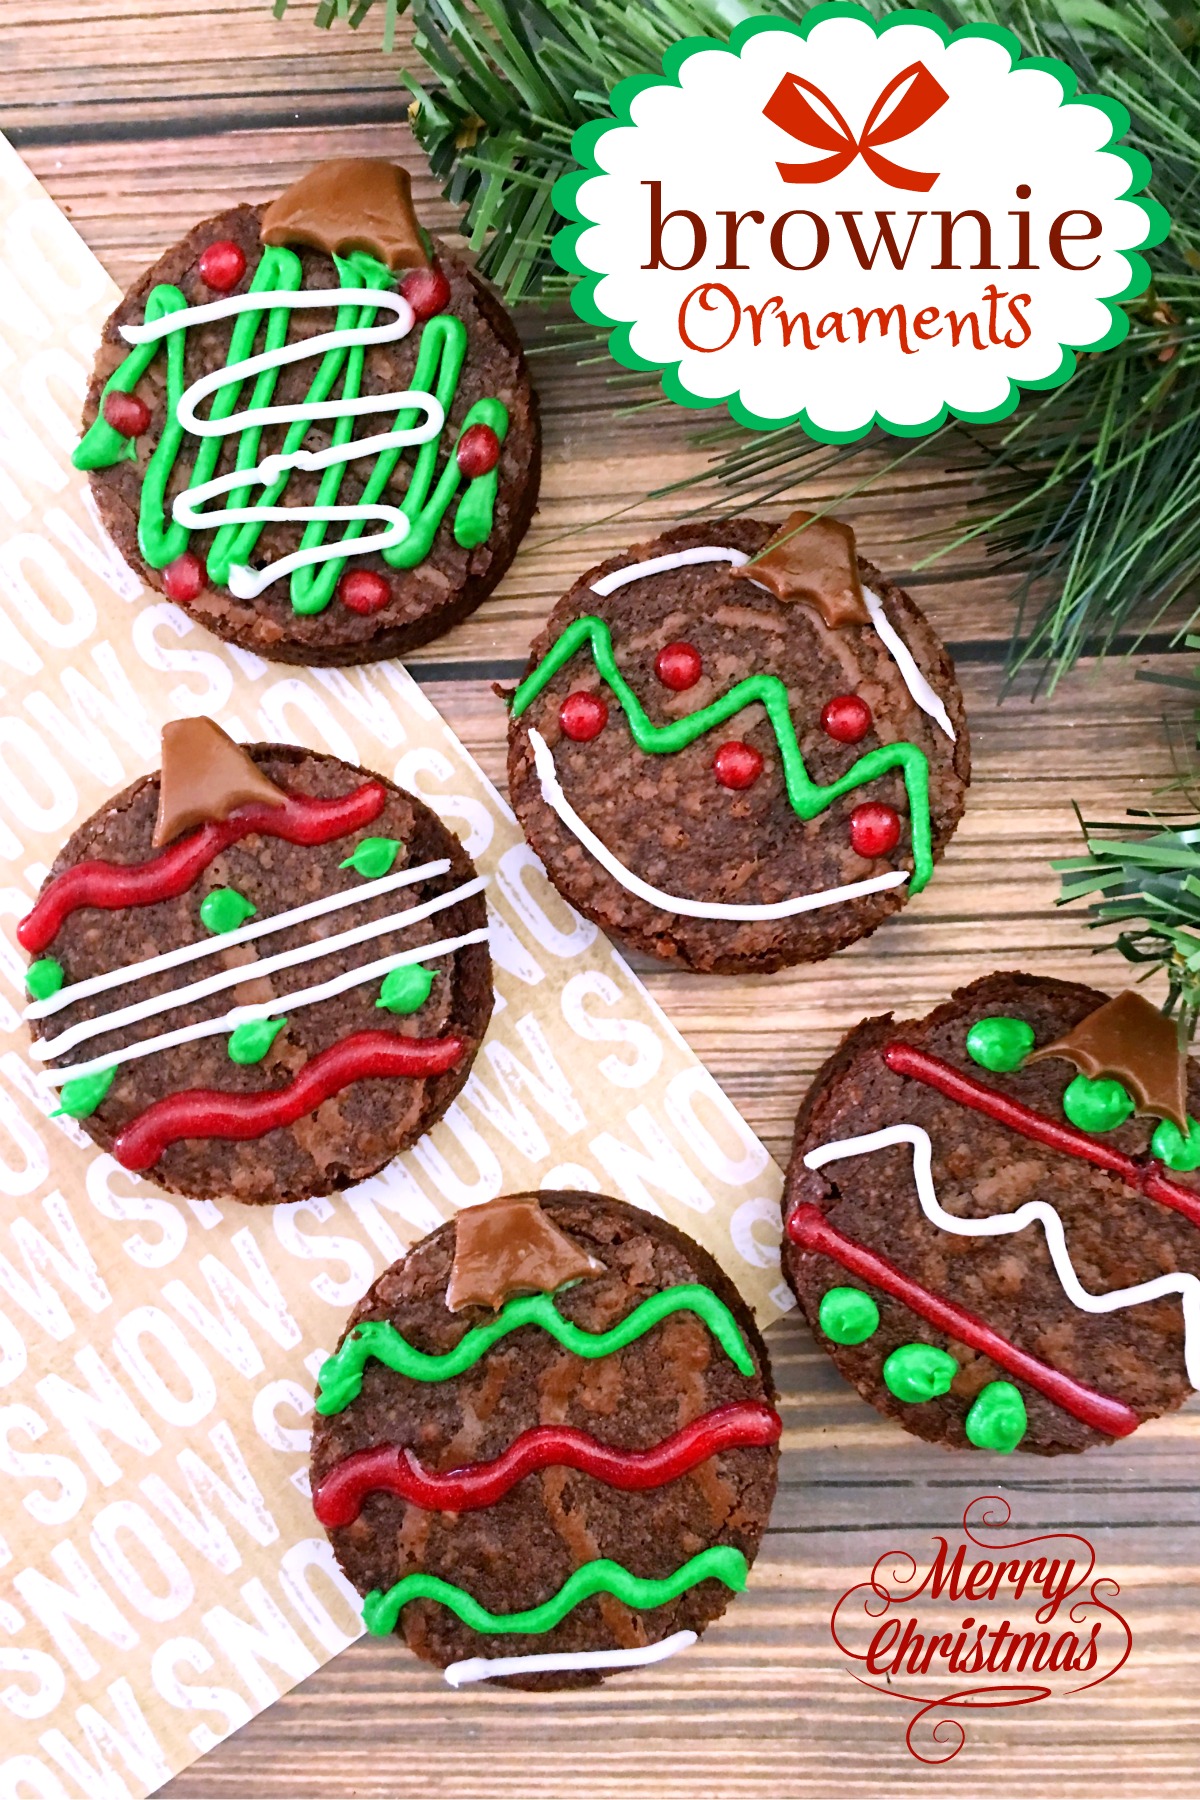 Brownie Ornaments ~ a fun holiday treat to do with your kids from 5DollarDinners.com